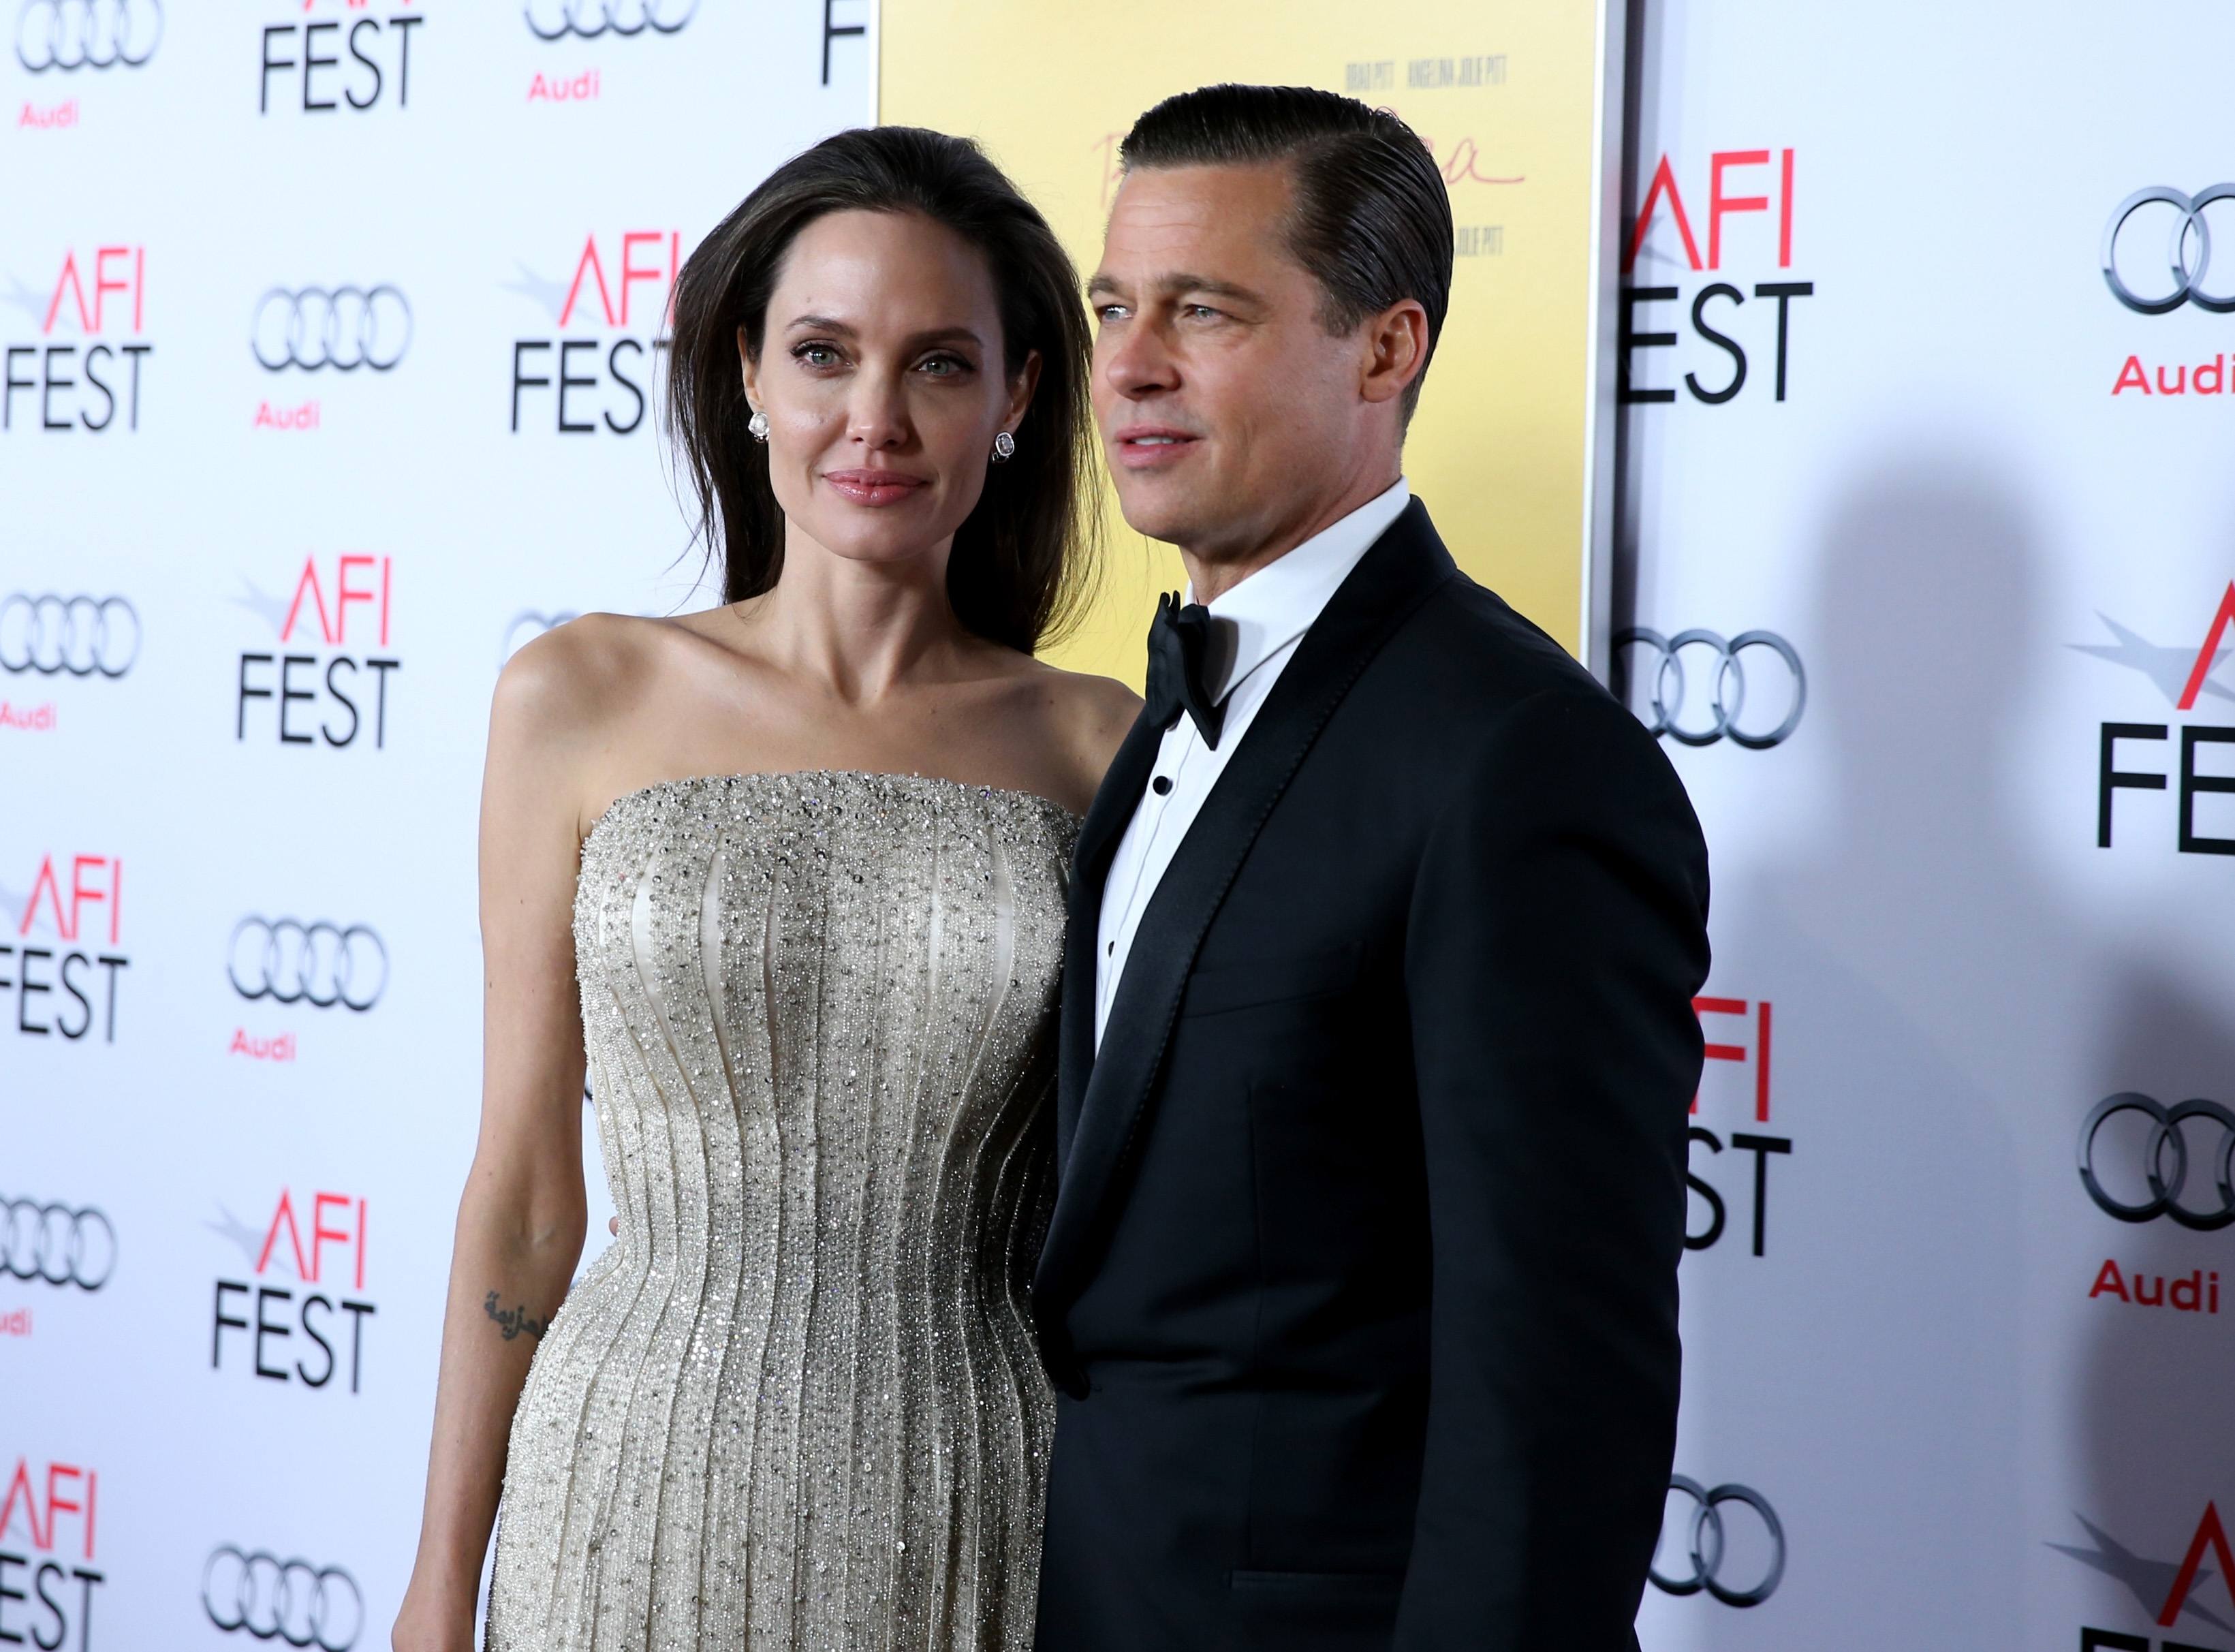 actor-producer Brad Pitt attend Audi at the opening night gala premiere of 'By the Sea'